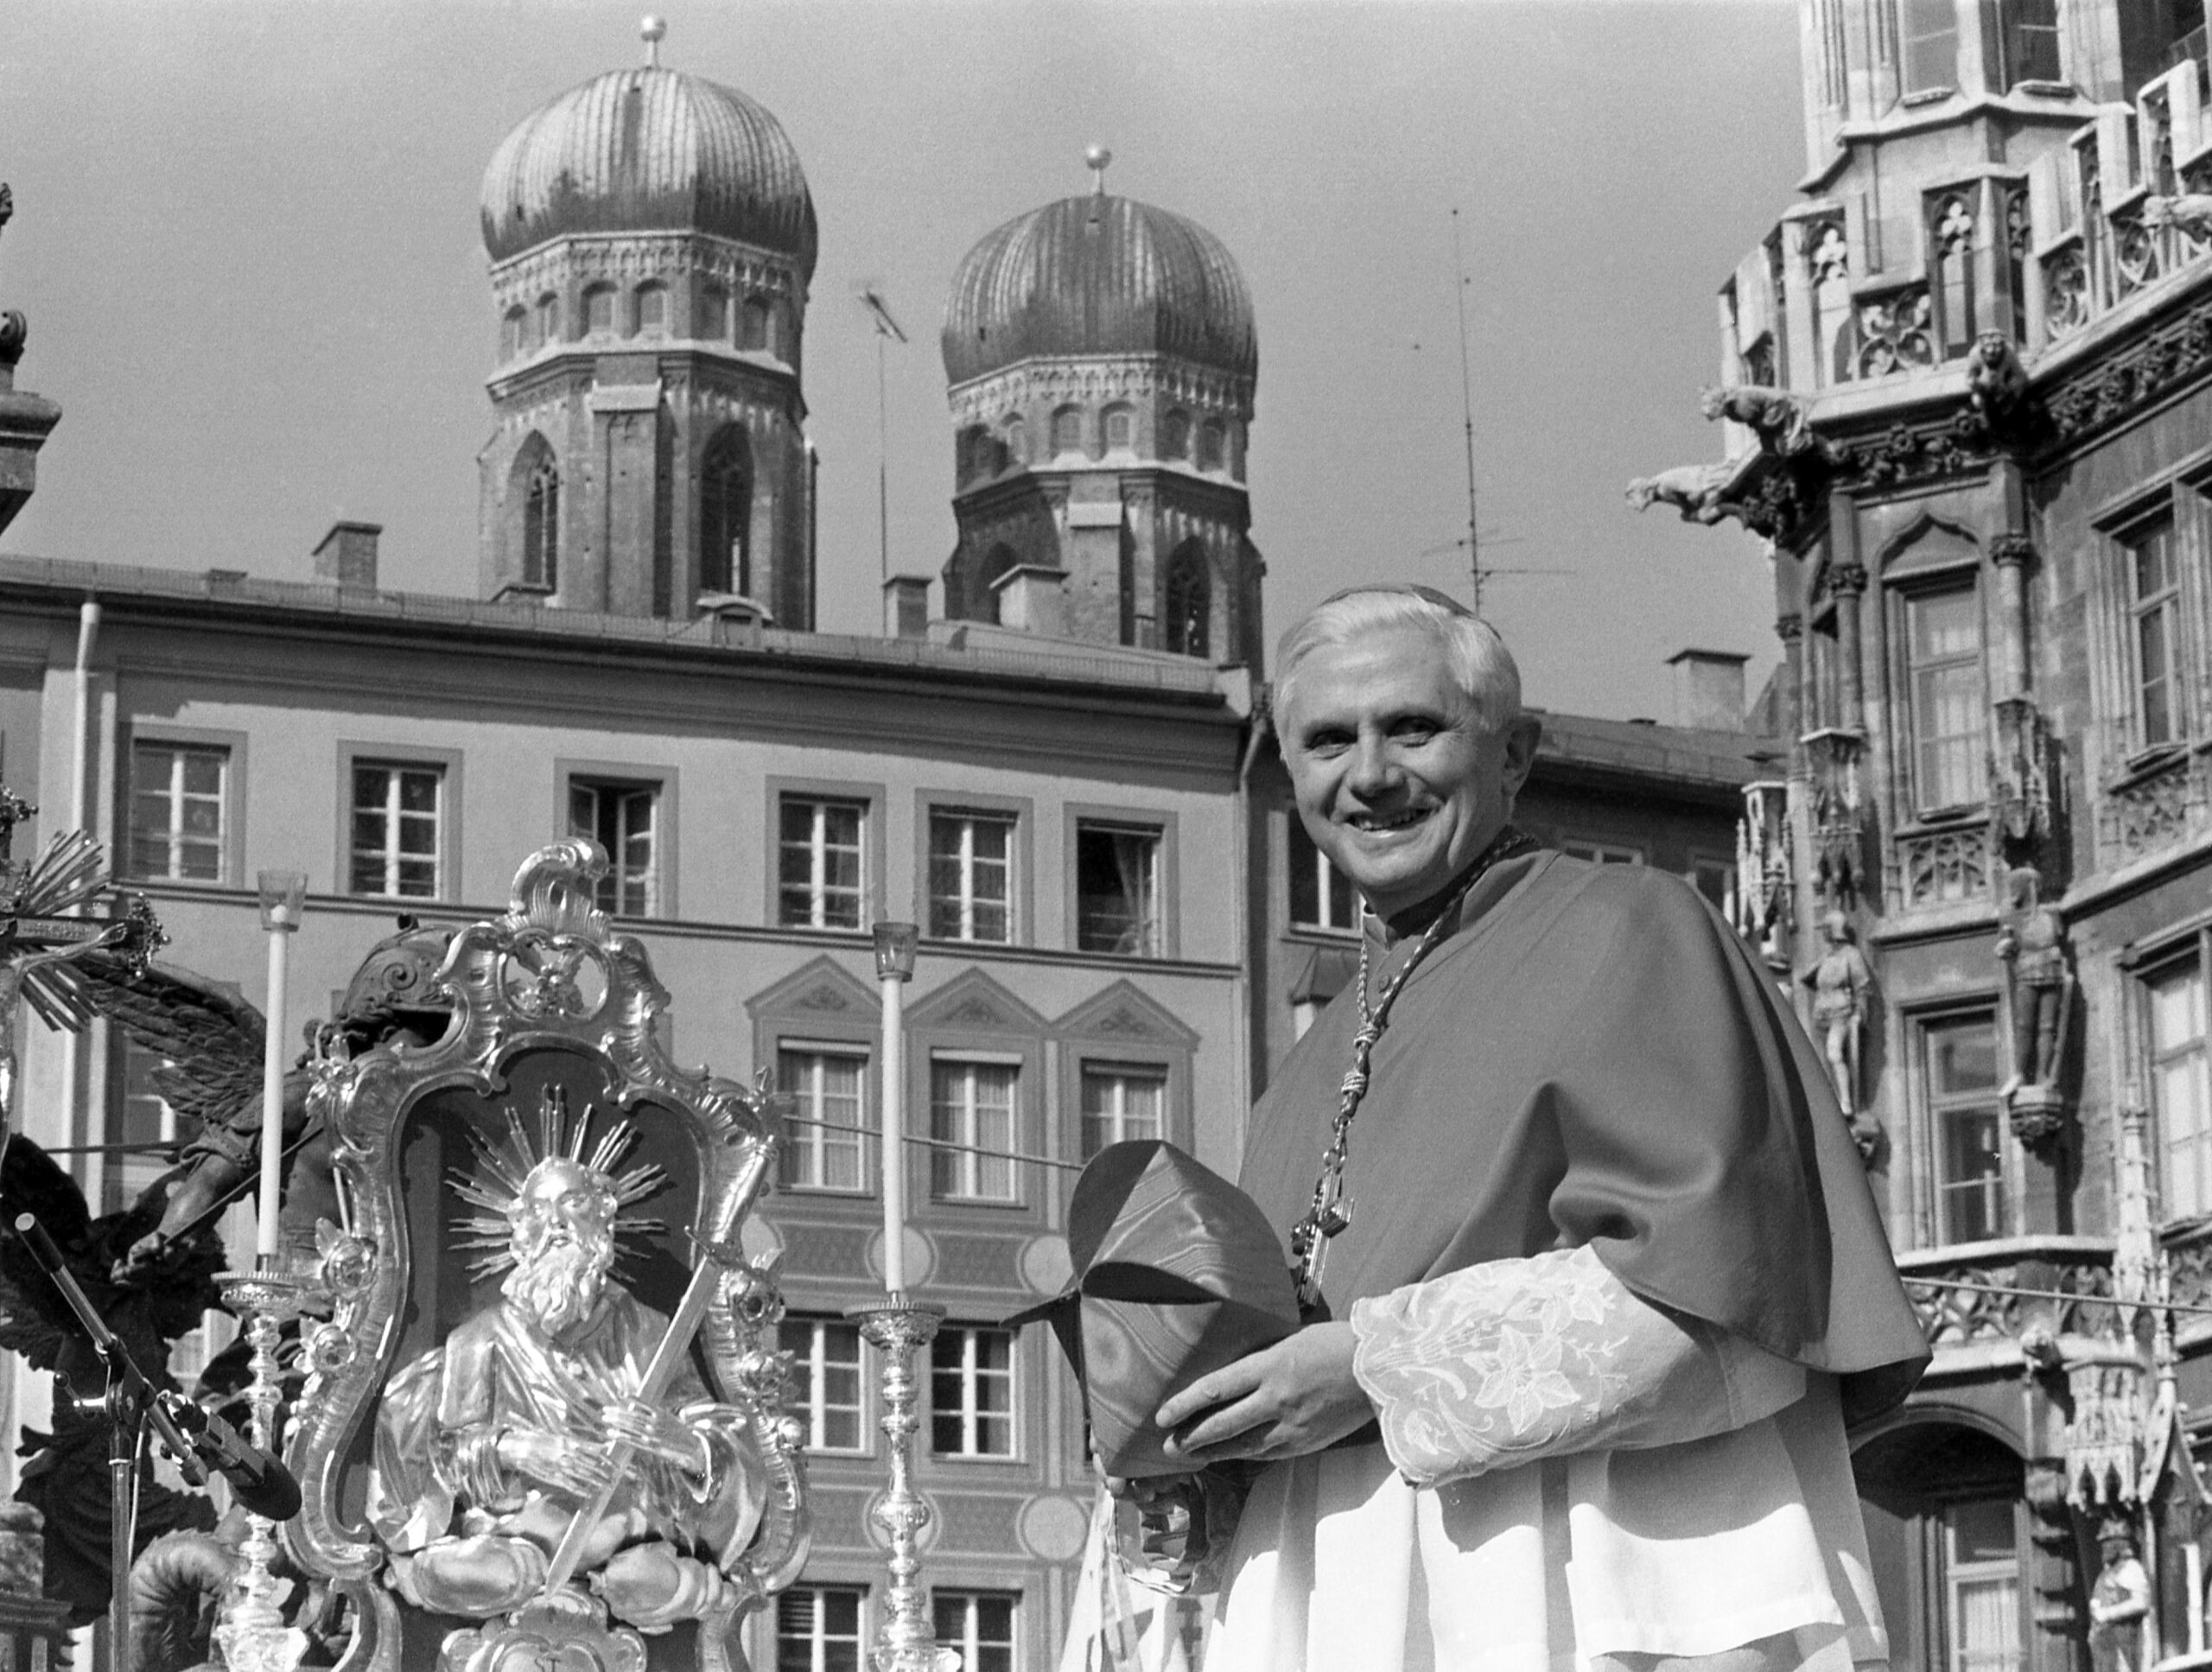 With the towers of the cathedral in the background, Cardinal Joseph Ratzinger, later Pope Benedict XVI, bids farewell to the Bavarian believers in downtown Munich, Germany, Feb. 28, 1982. The Vatican on Jan. 26, 2022, strongly defended Pope Emeritus Benedict XVI’s record in fighting clergy sexual abuse and cautioned against looking for “easy scapegoats and summary judgments,” after an independent report faulted his handling of four cases of abuse when he was archbishop of Munich. (AP Photo/Dieter Endlicher, File)